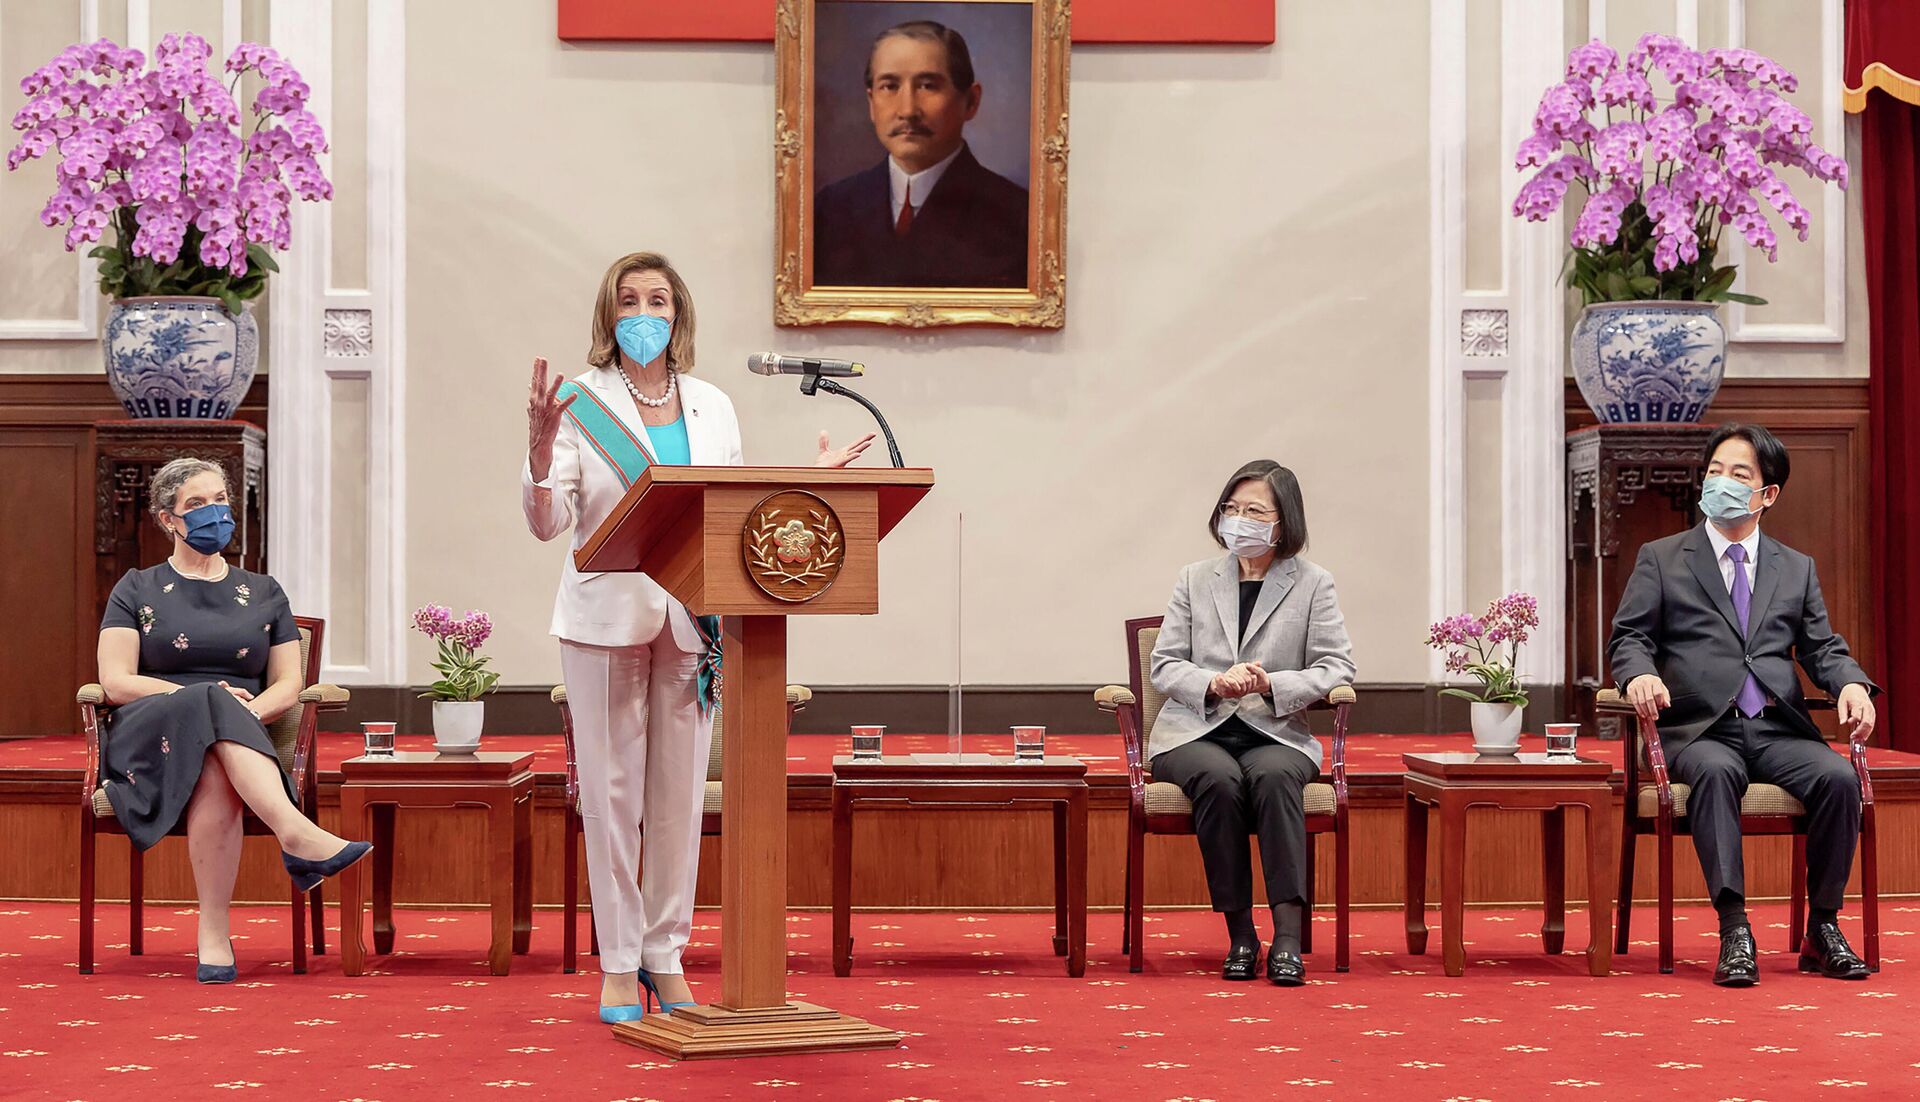 In this photo released by the Taiwan Presidential Office, U.S. House Speaker Nancy Pelosi speaks during a meeting with Taiwanese President President Tsai Ing-wen, second from right, in Taipei, Taiwan, Wednesday, Aug. 3, 2022 - Sputnik International, 1920, 30.08.2022